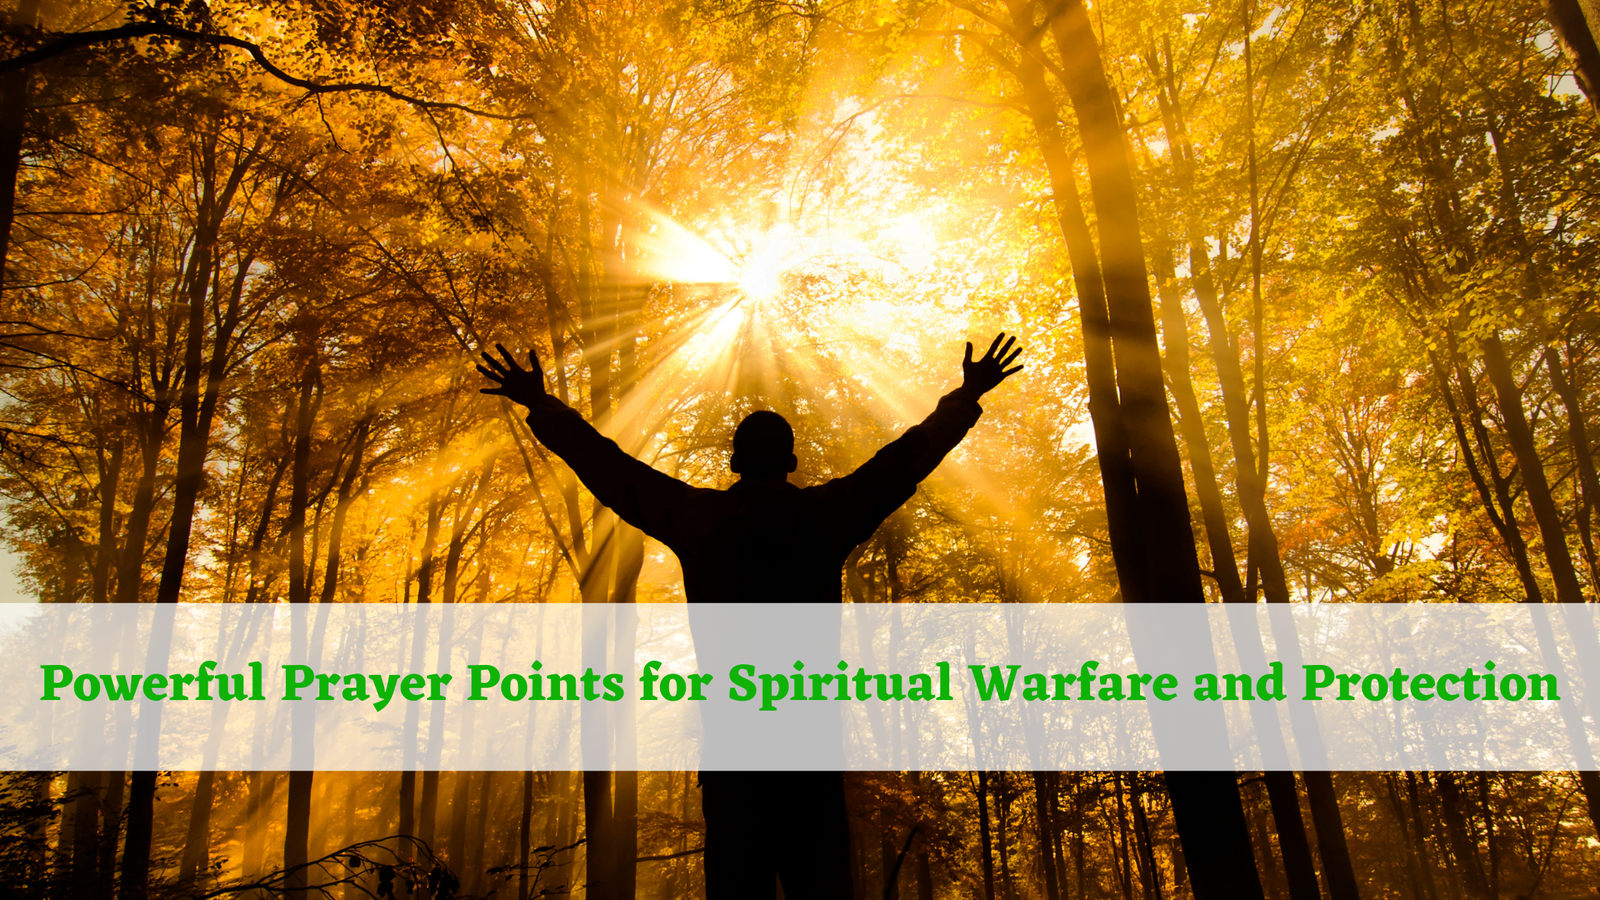 Powerful Prayer Points for Spiritual Warfare and Protection